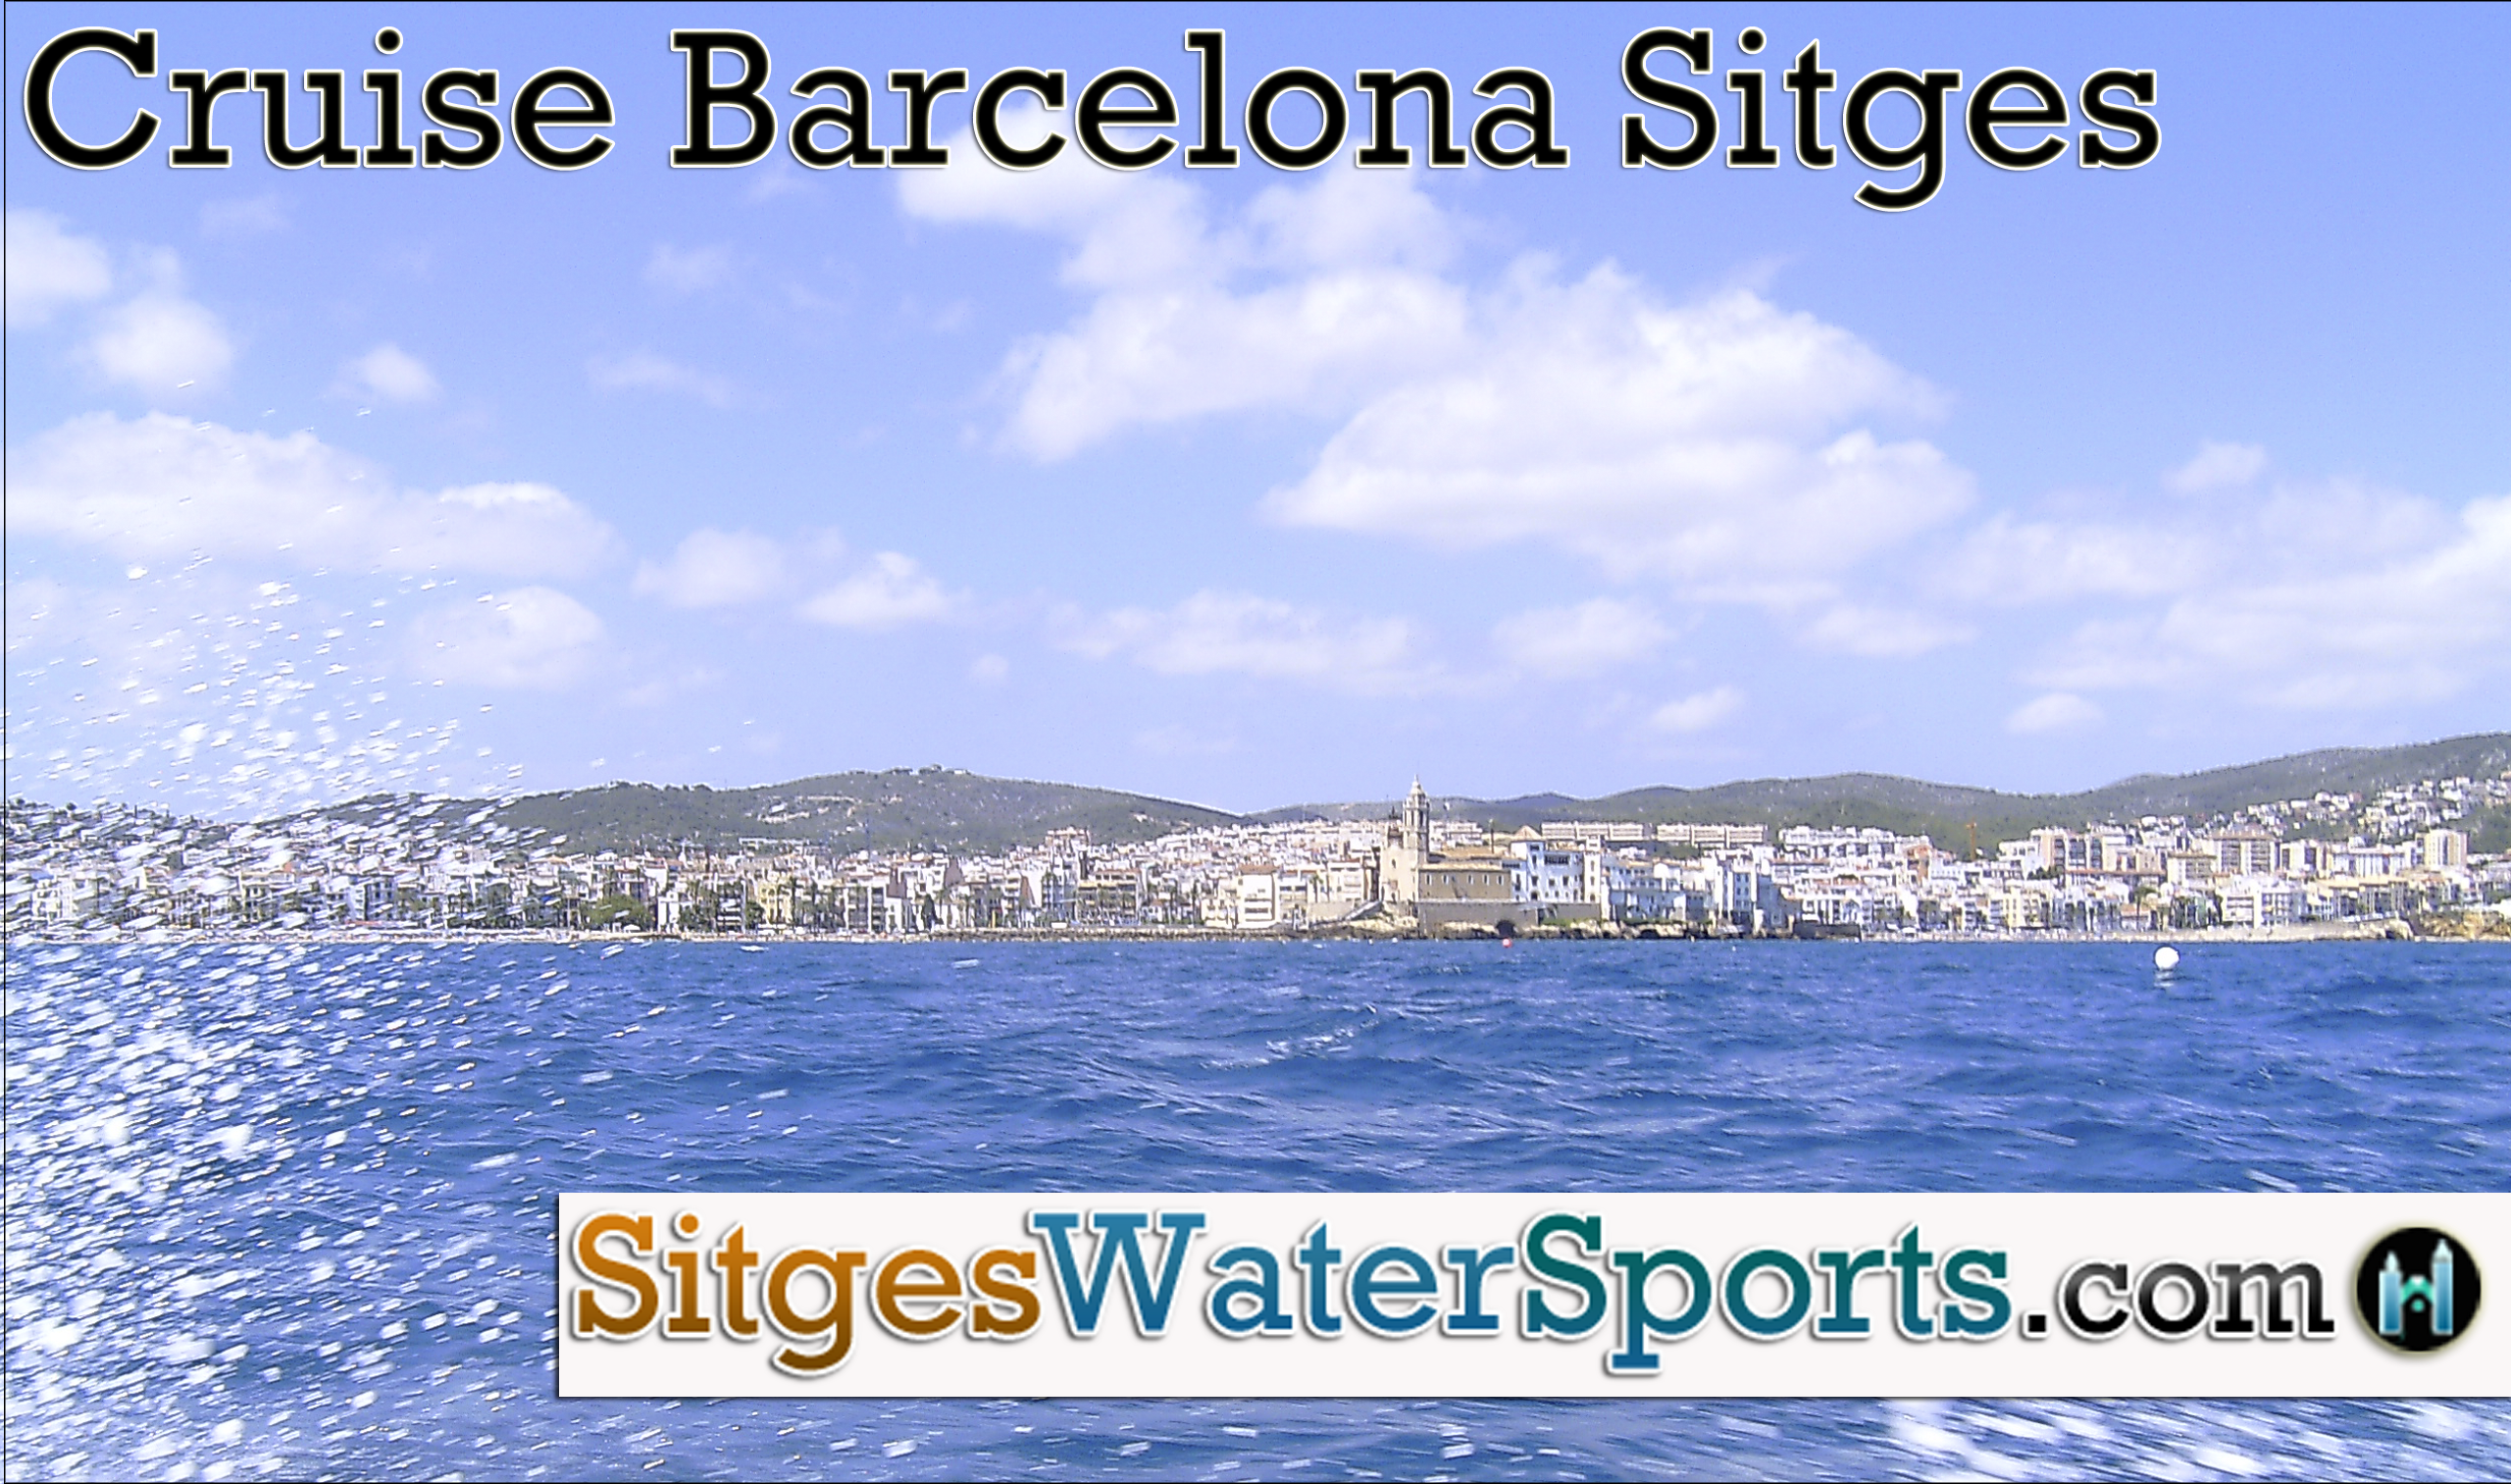 sitges-cruise-Barcelona-Watersports (2)